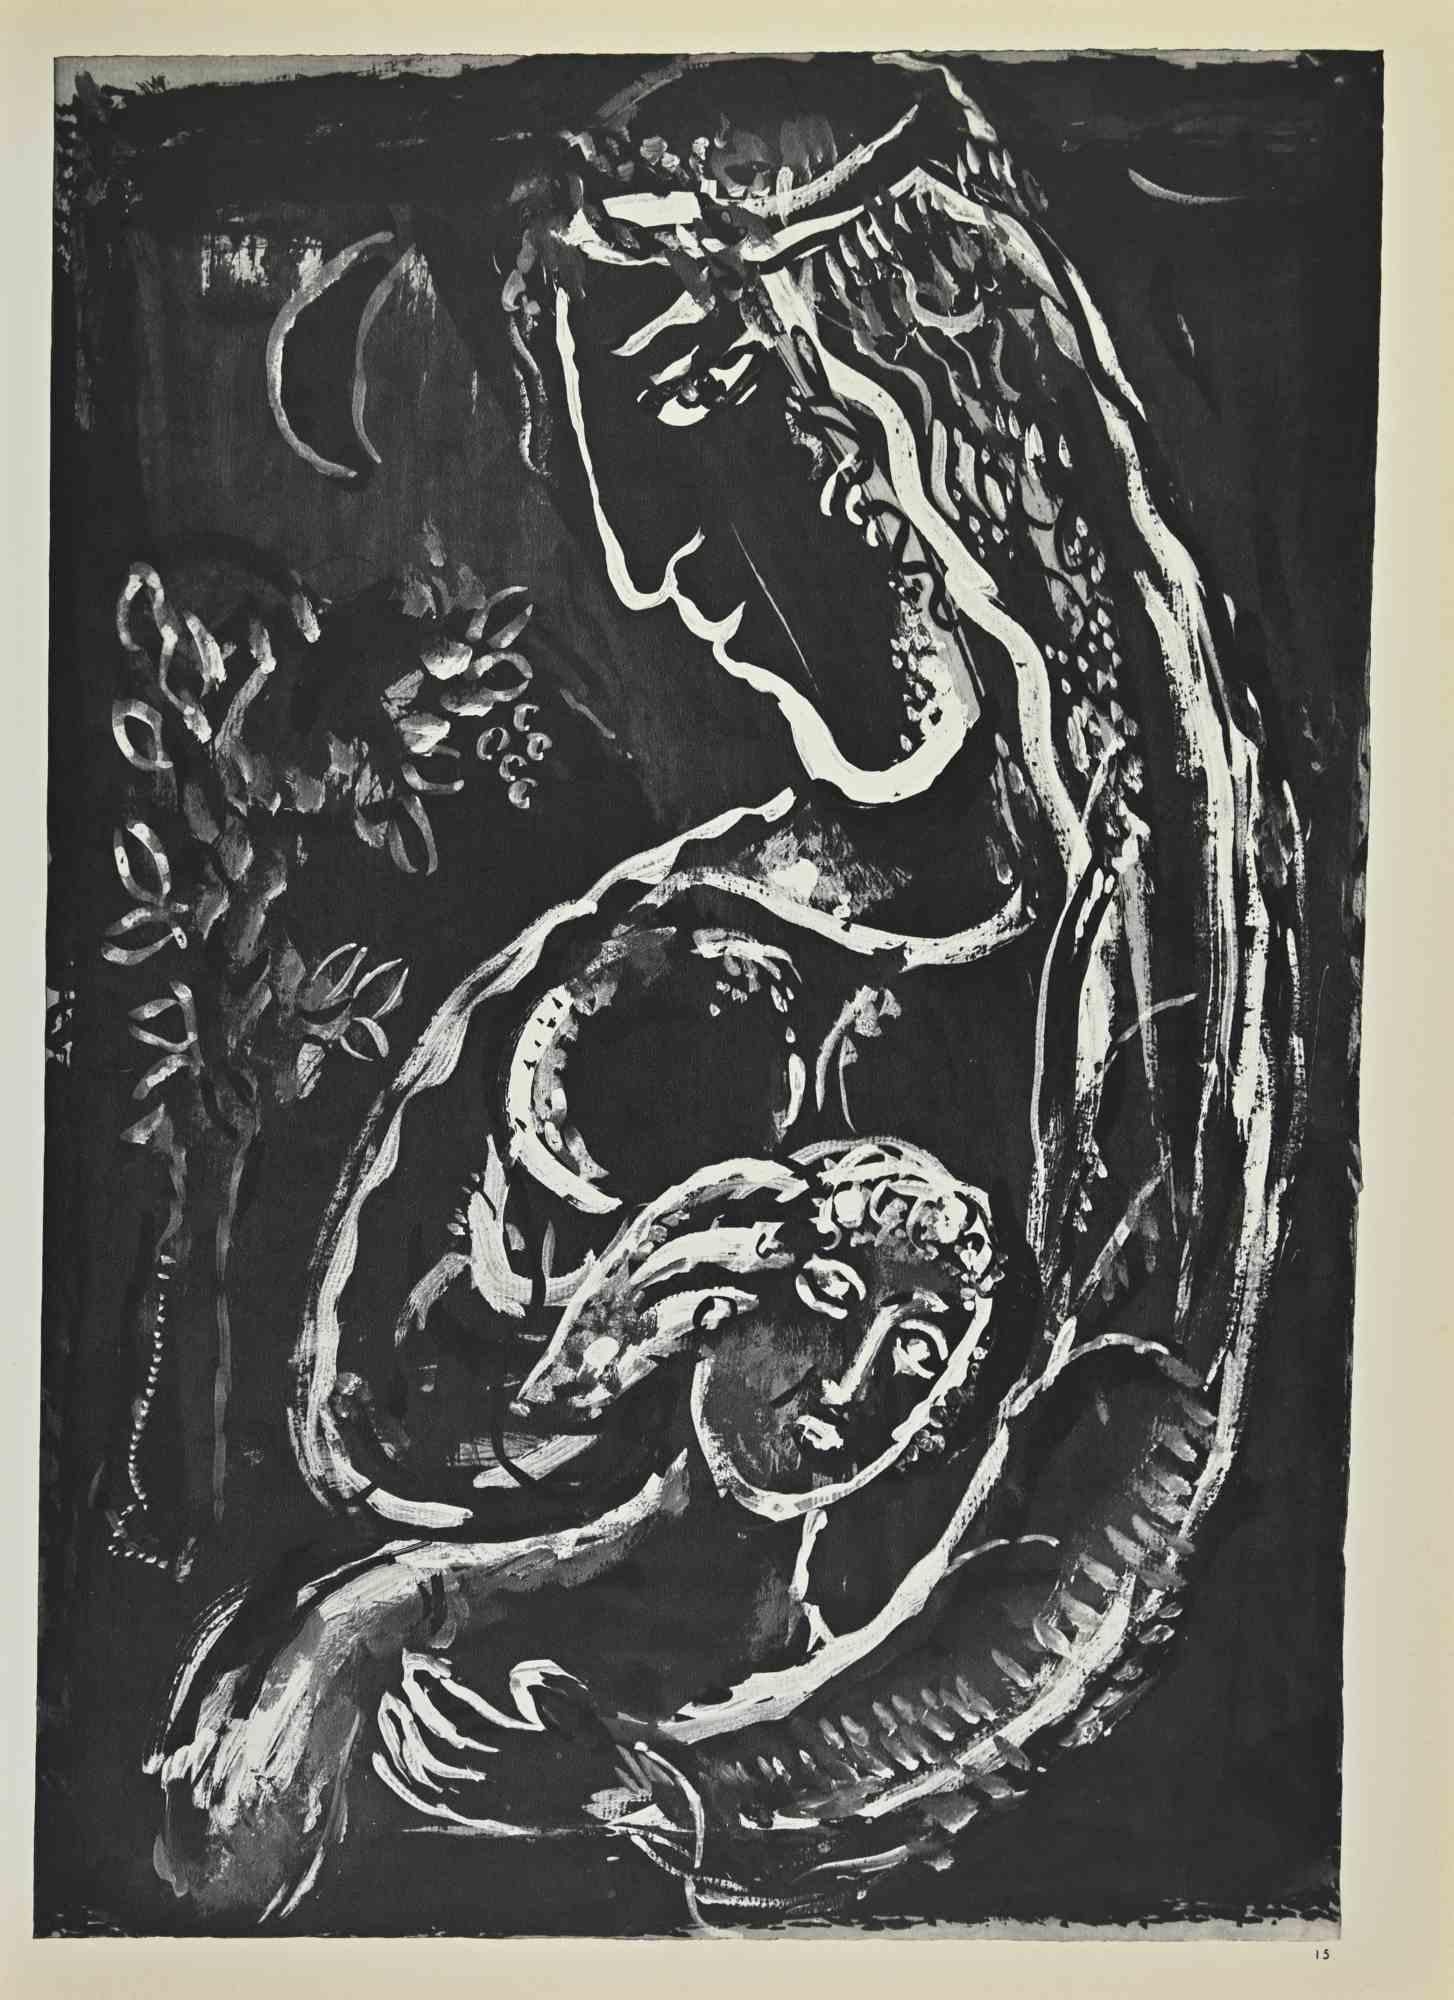 Hagar in the Desert  is an artwork realized by March Chagall, 1960s.

Lithograph on brown-toned paper, no signature.

Lithograph on both sheets.

Edition of 6500 unsigned lithographs. Printed by Mourlot and published by Tériade, Paris.

Ref.